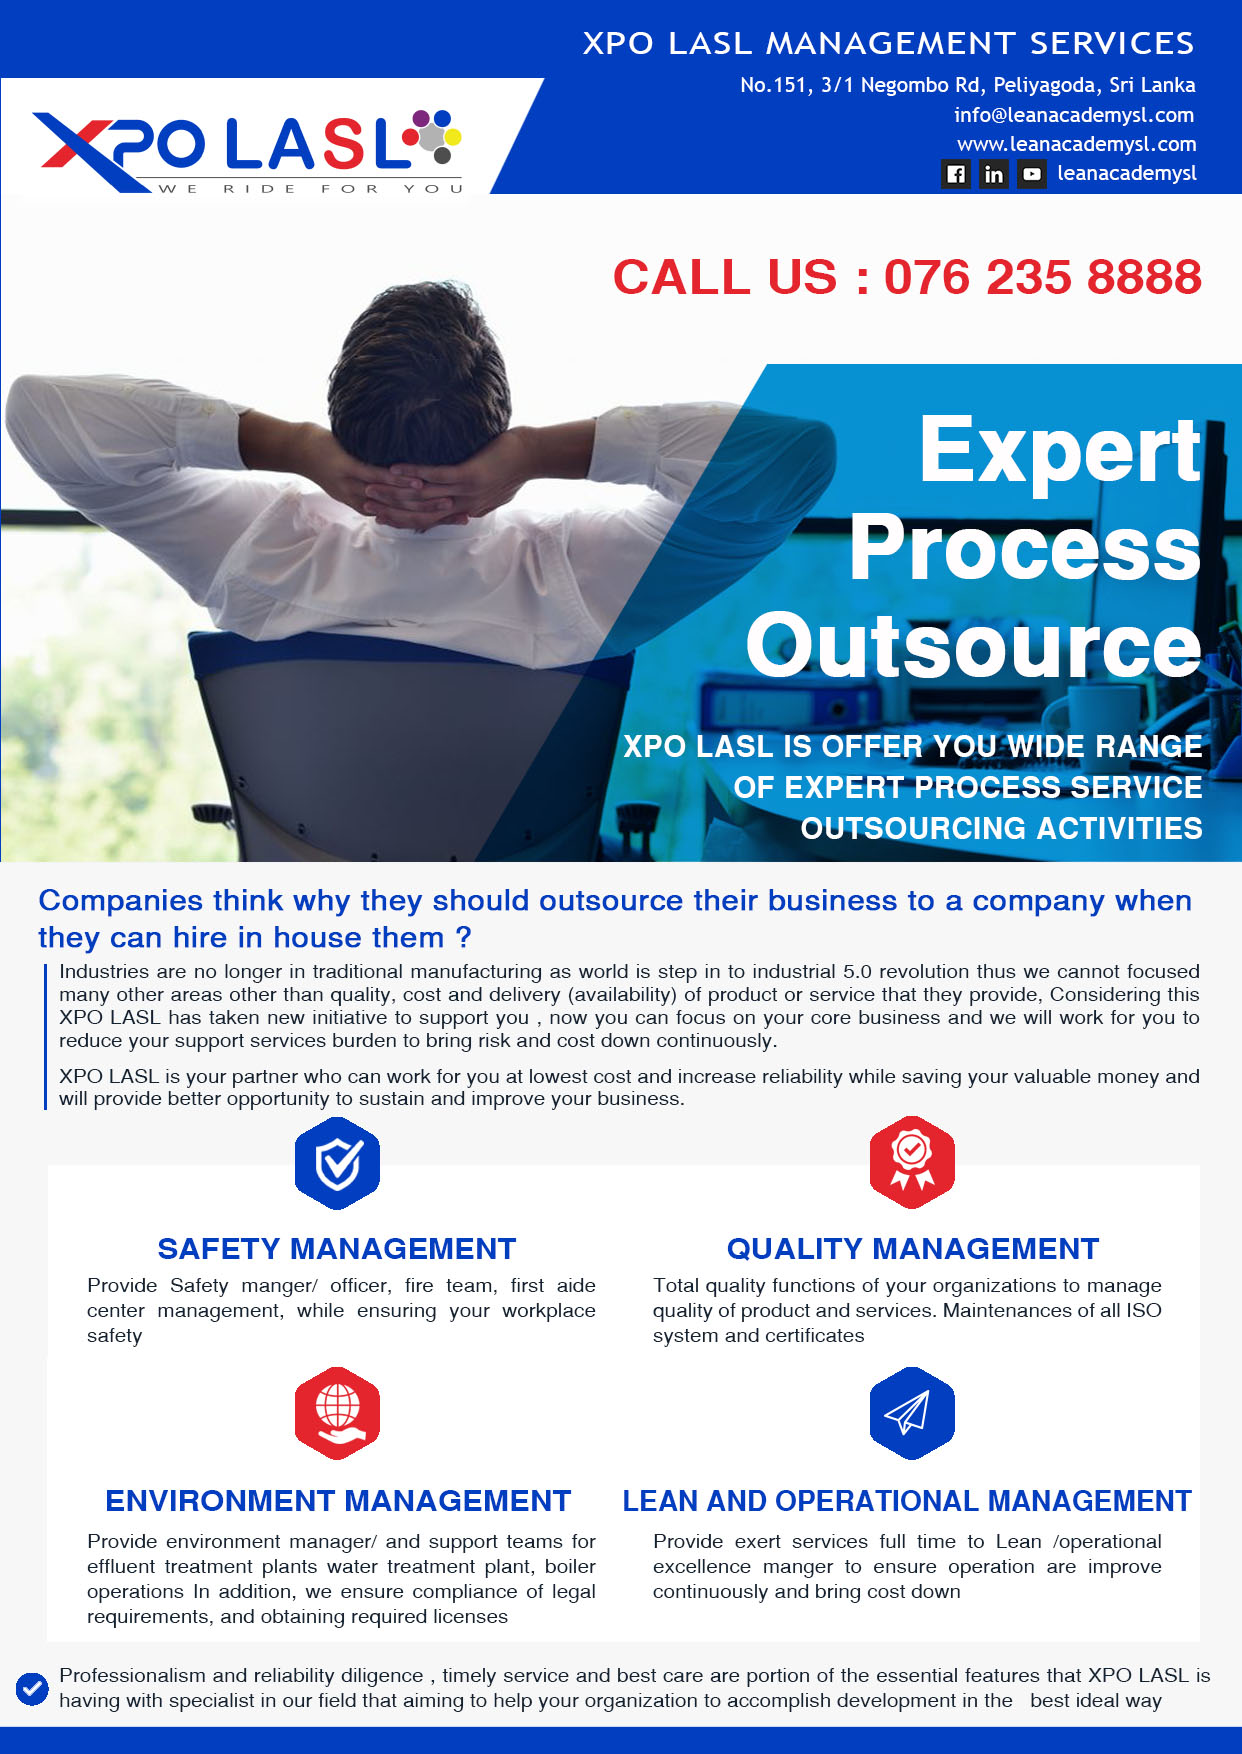 Xpo LASL introduce Expert Process Outsource Service